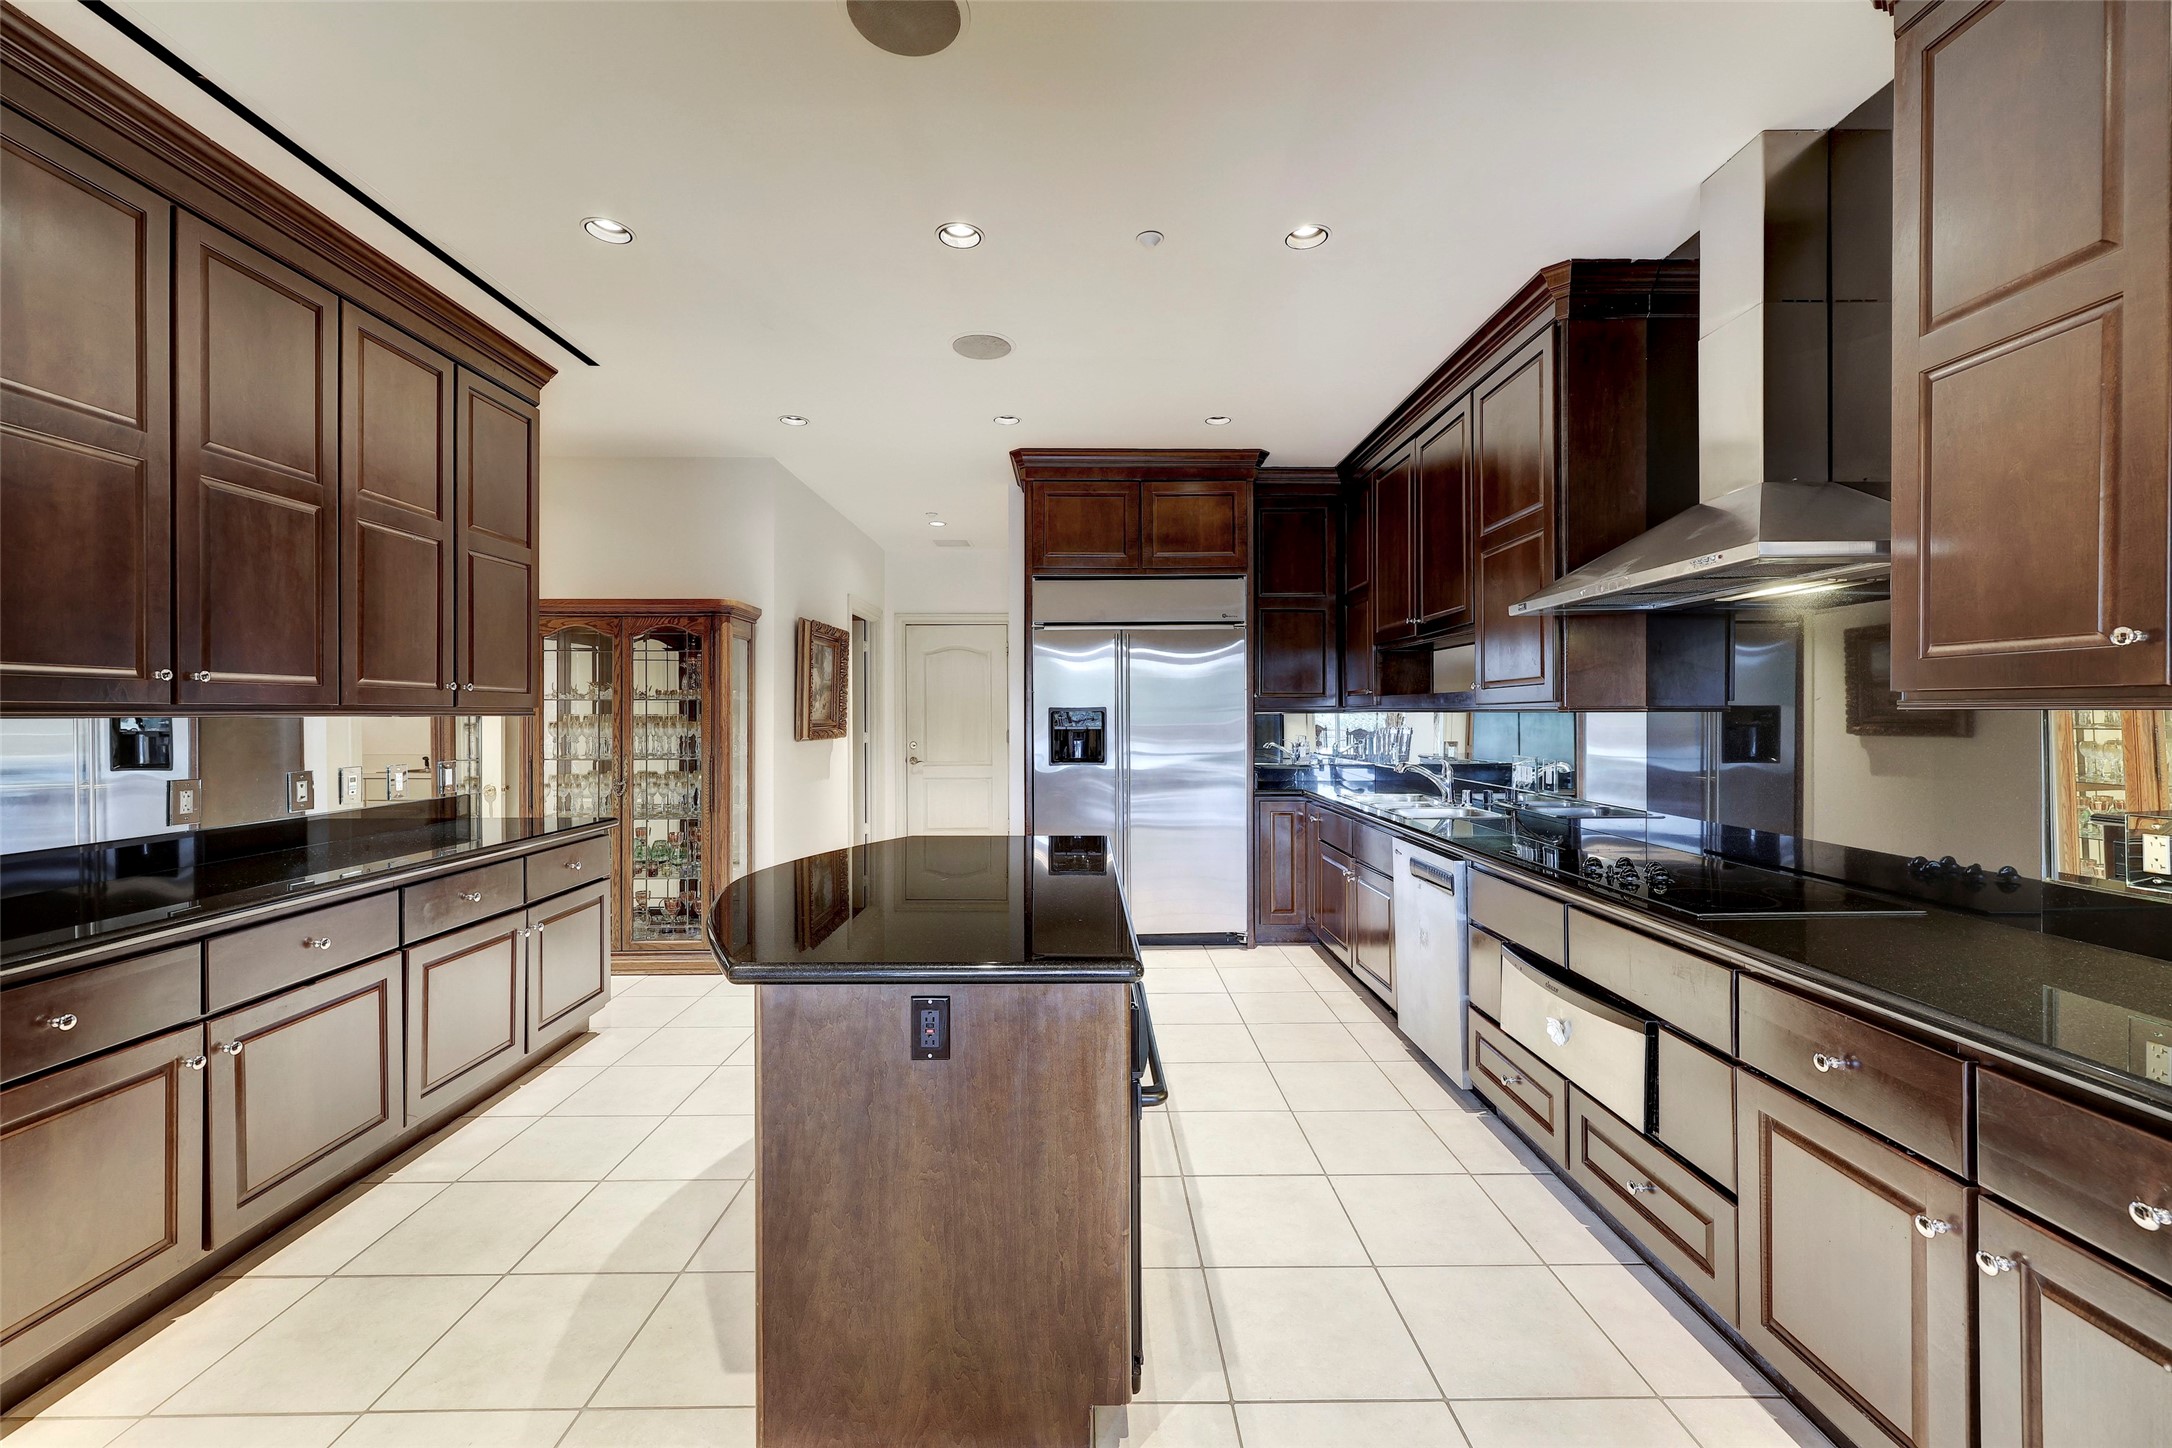 Huge island kitchen with granite counters and a mirrored backsplash.